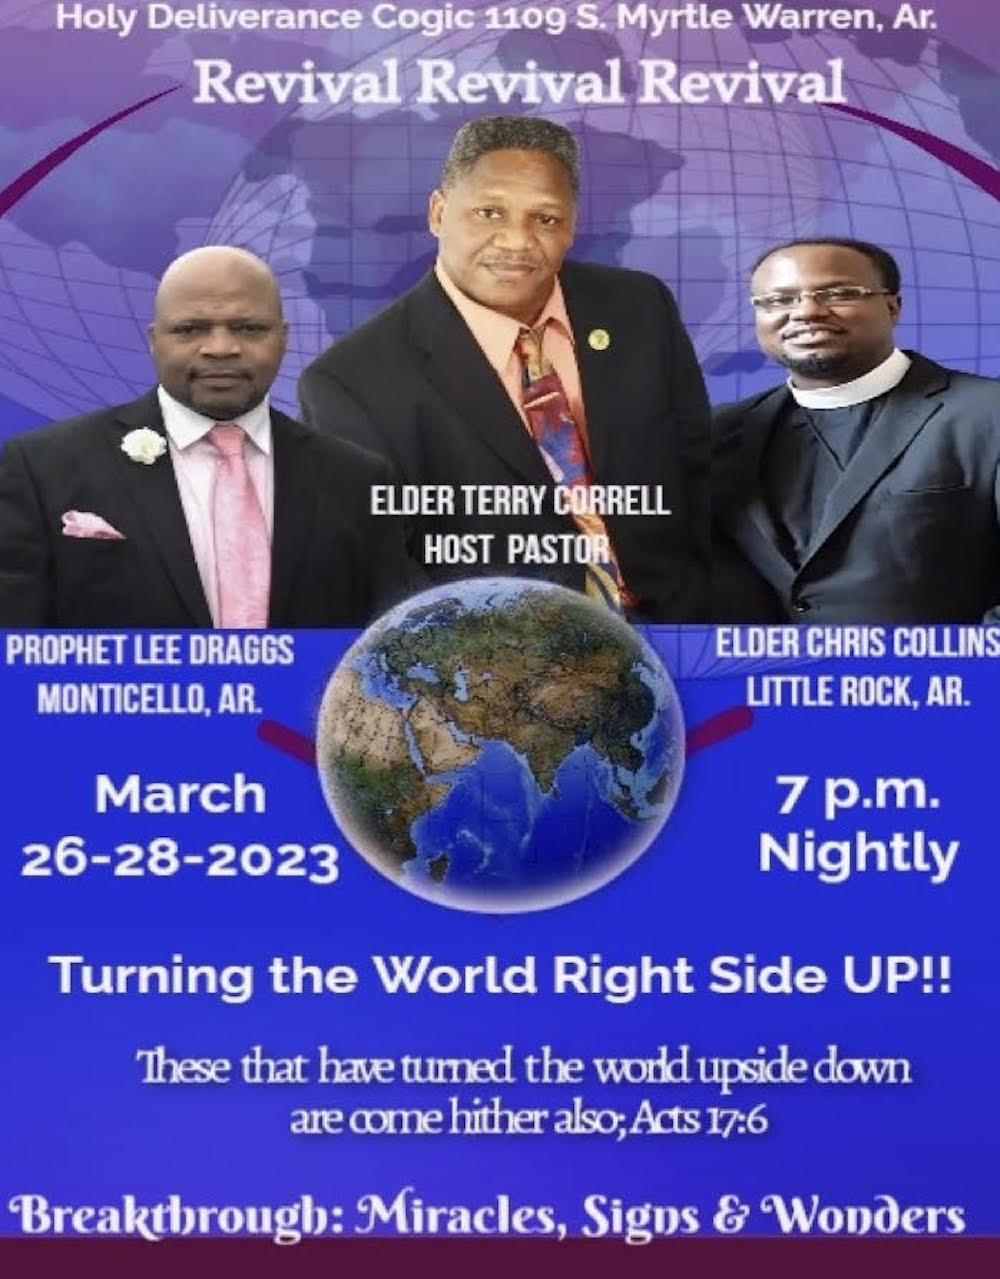 Holy Deliverance Cogic Revival services set for March 26-28